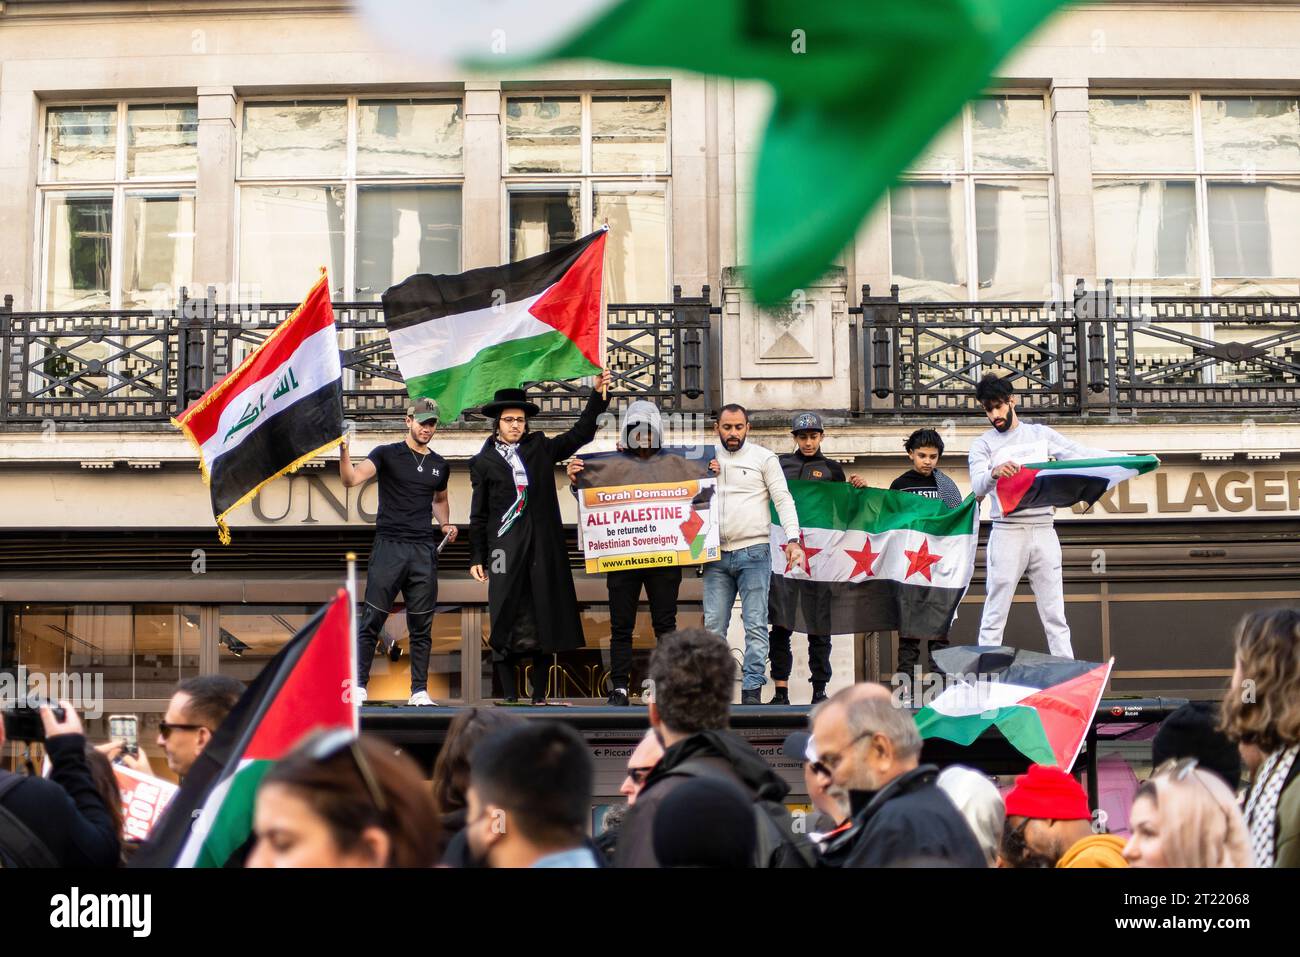 Protesters from the Orthodox Jews Against Zionism movement attend a 'March For Palestine', part of a pro-Palestinian national demonstration, in London Stock Photo